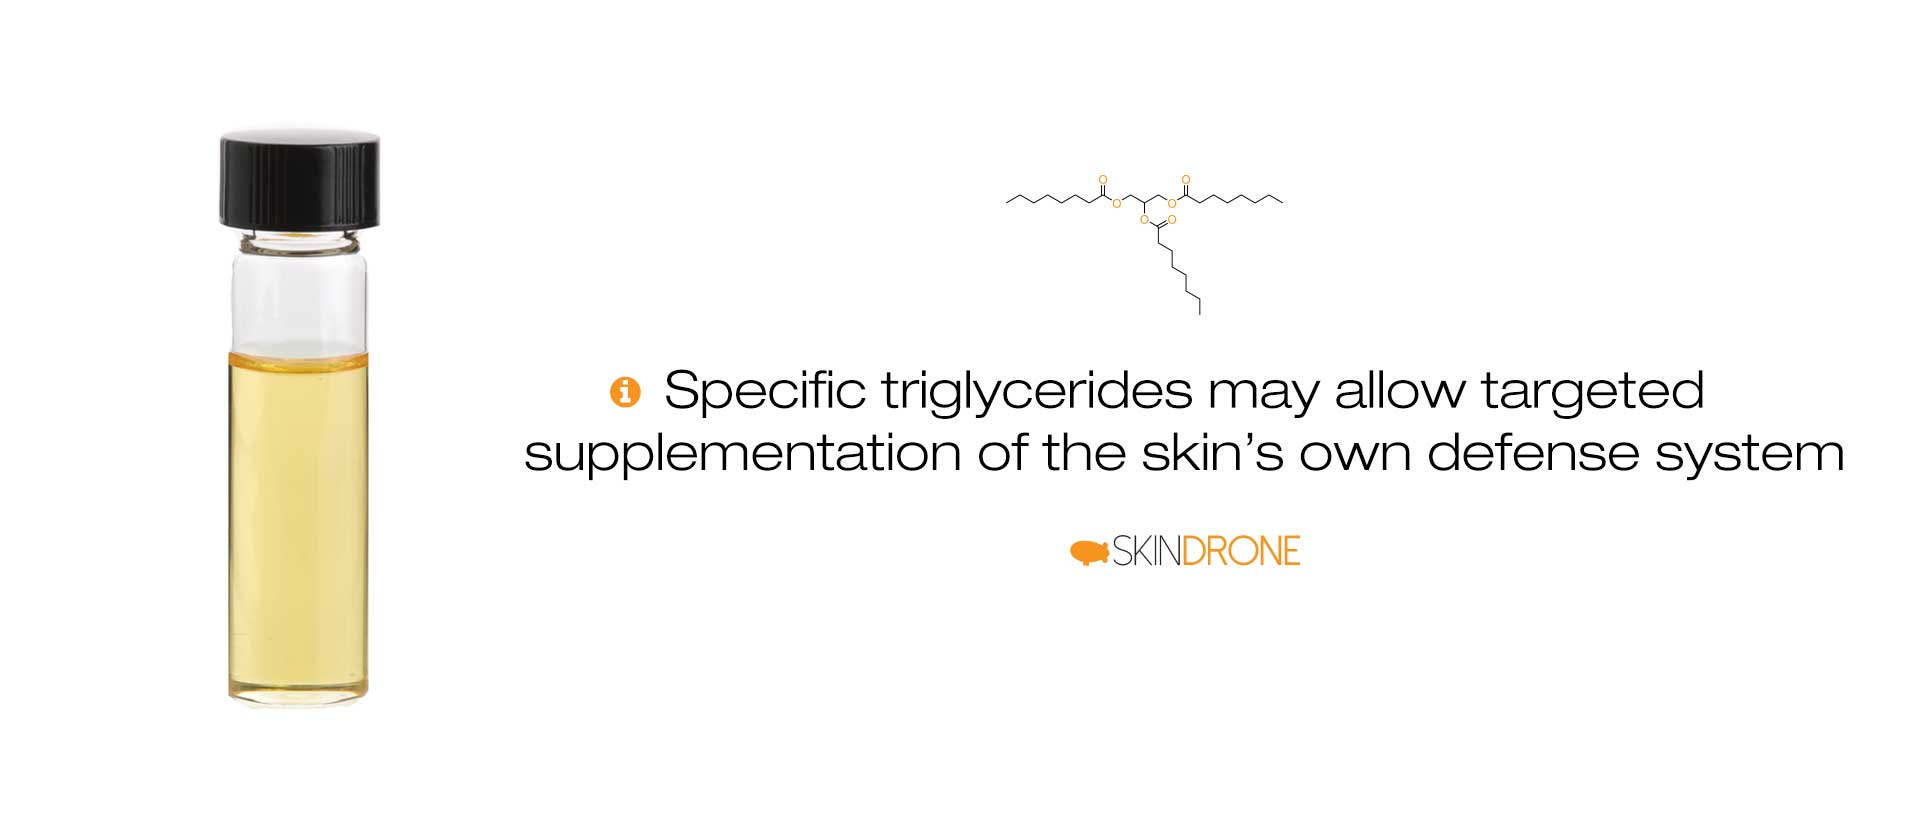 Specific triglycerides may allow trageted supplementation of the scalp's own defense system